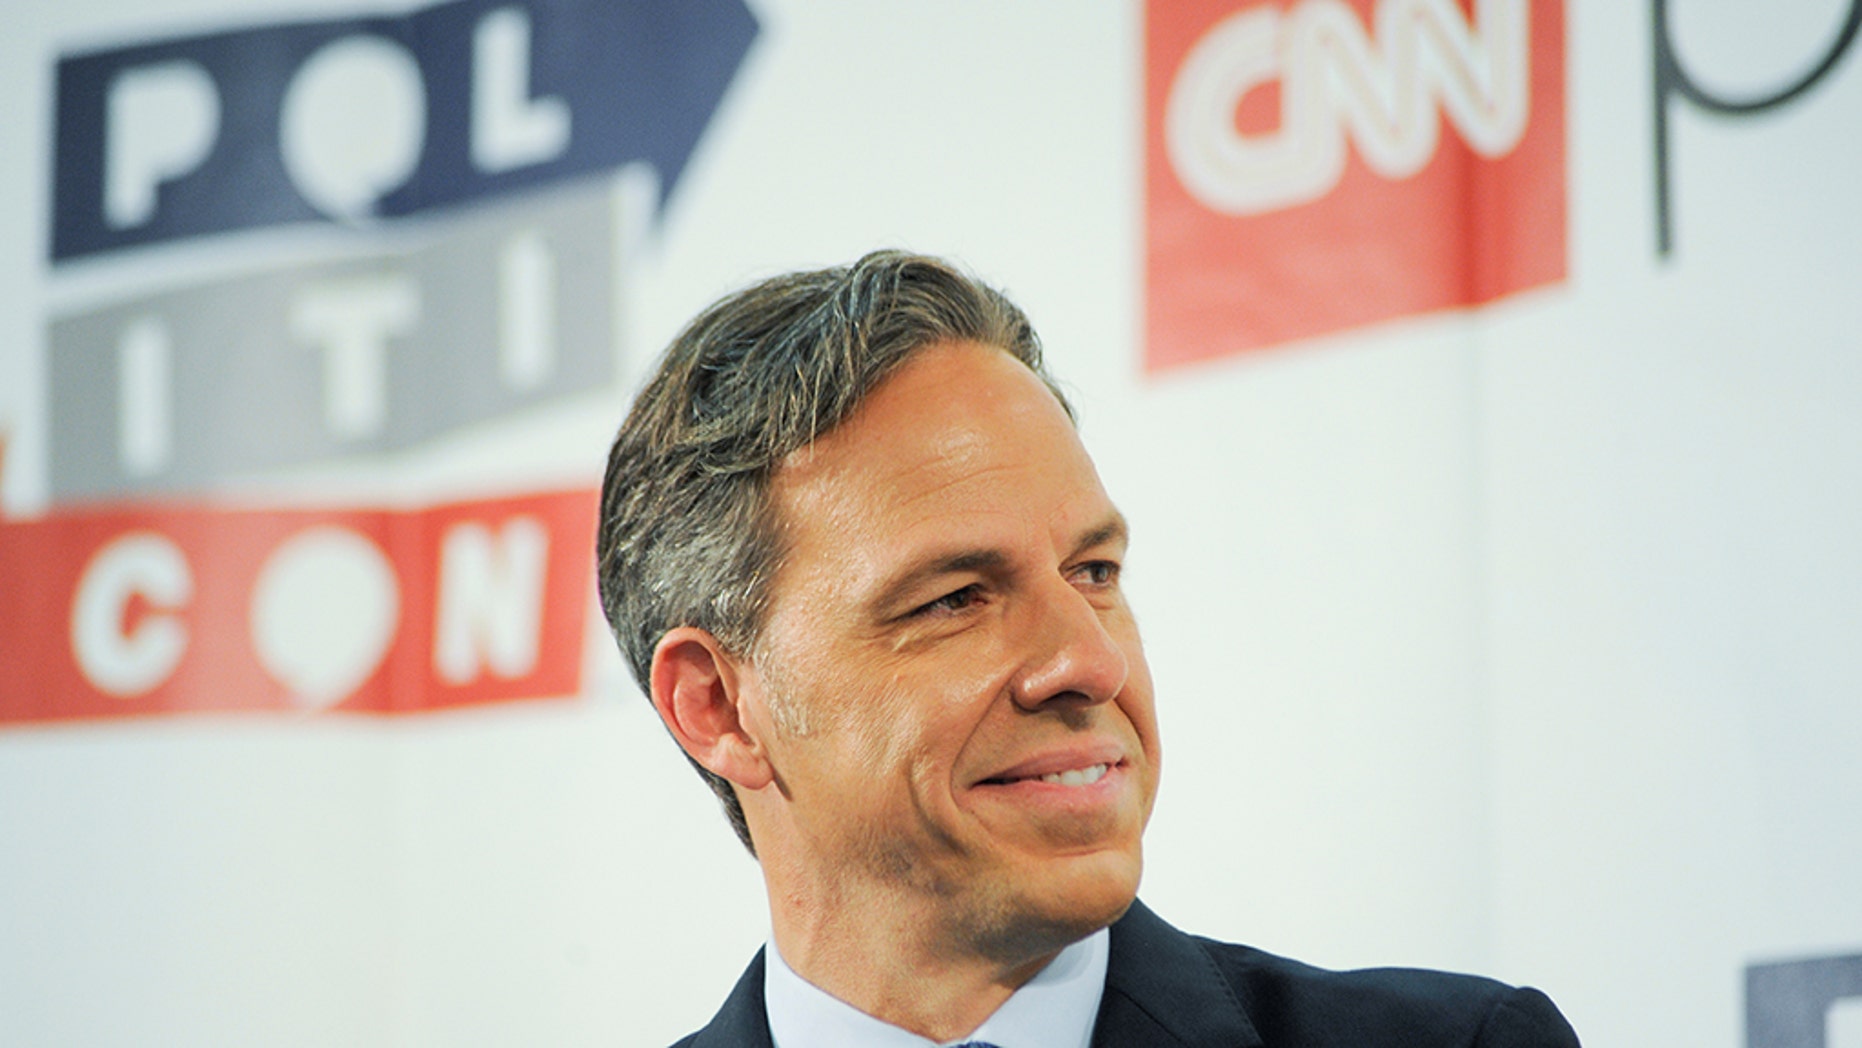 CNN's anchor, Jake Tapper, is under fire for keeping quiet when a guest said Trump had radicalized more people than ISIS. (REUTERS / Andrew Cullen, File)